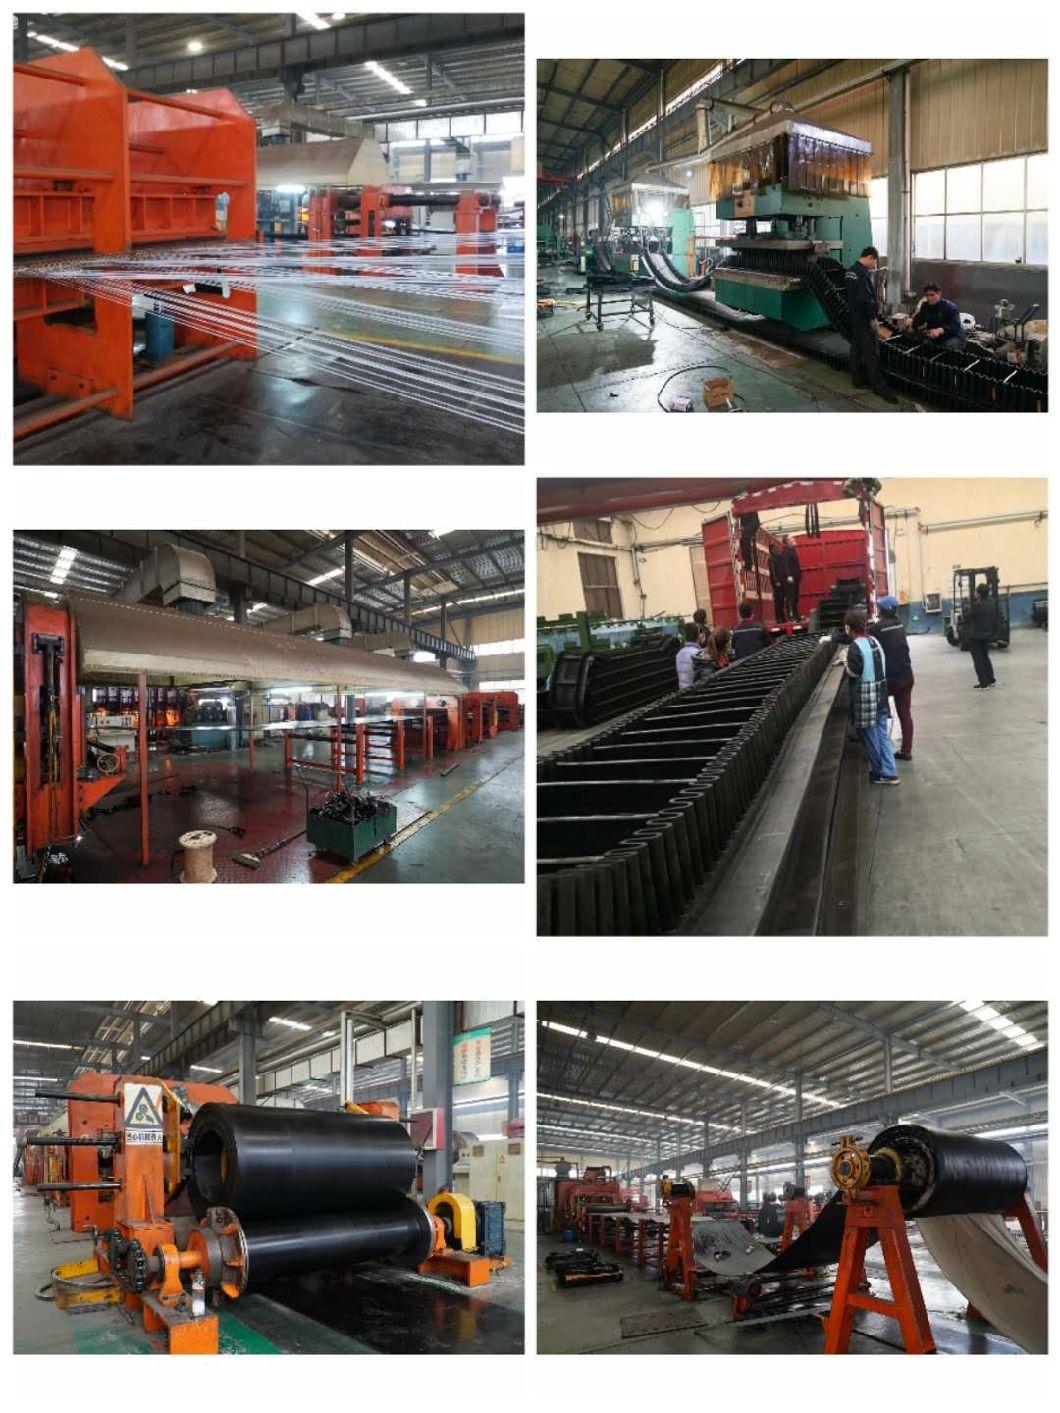 Multiply Fabric Core Rubber Conveyor Belt for Conveying Materials